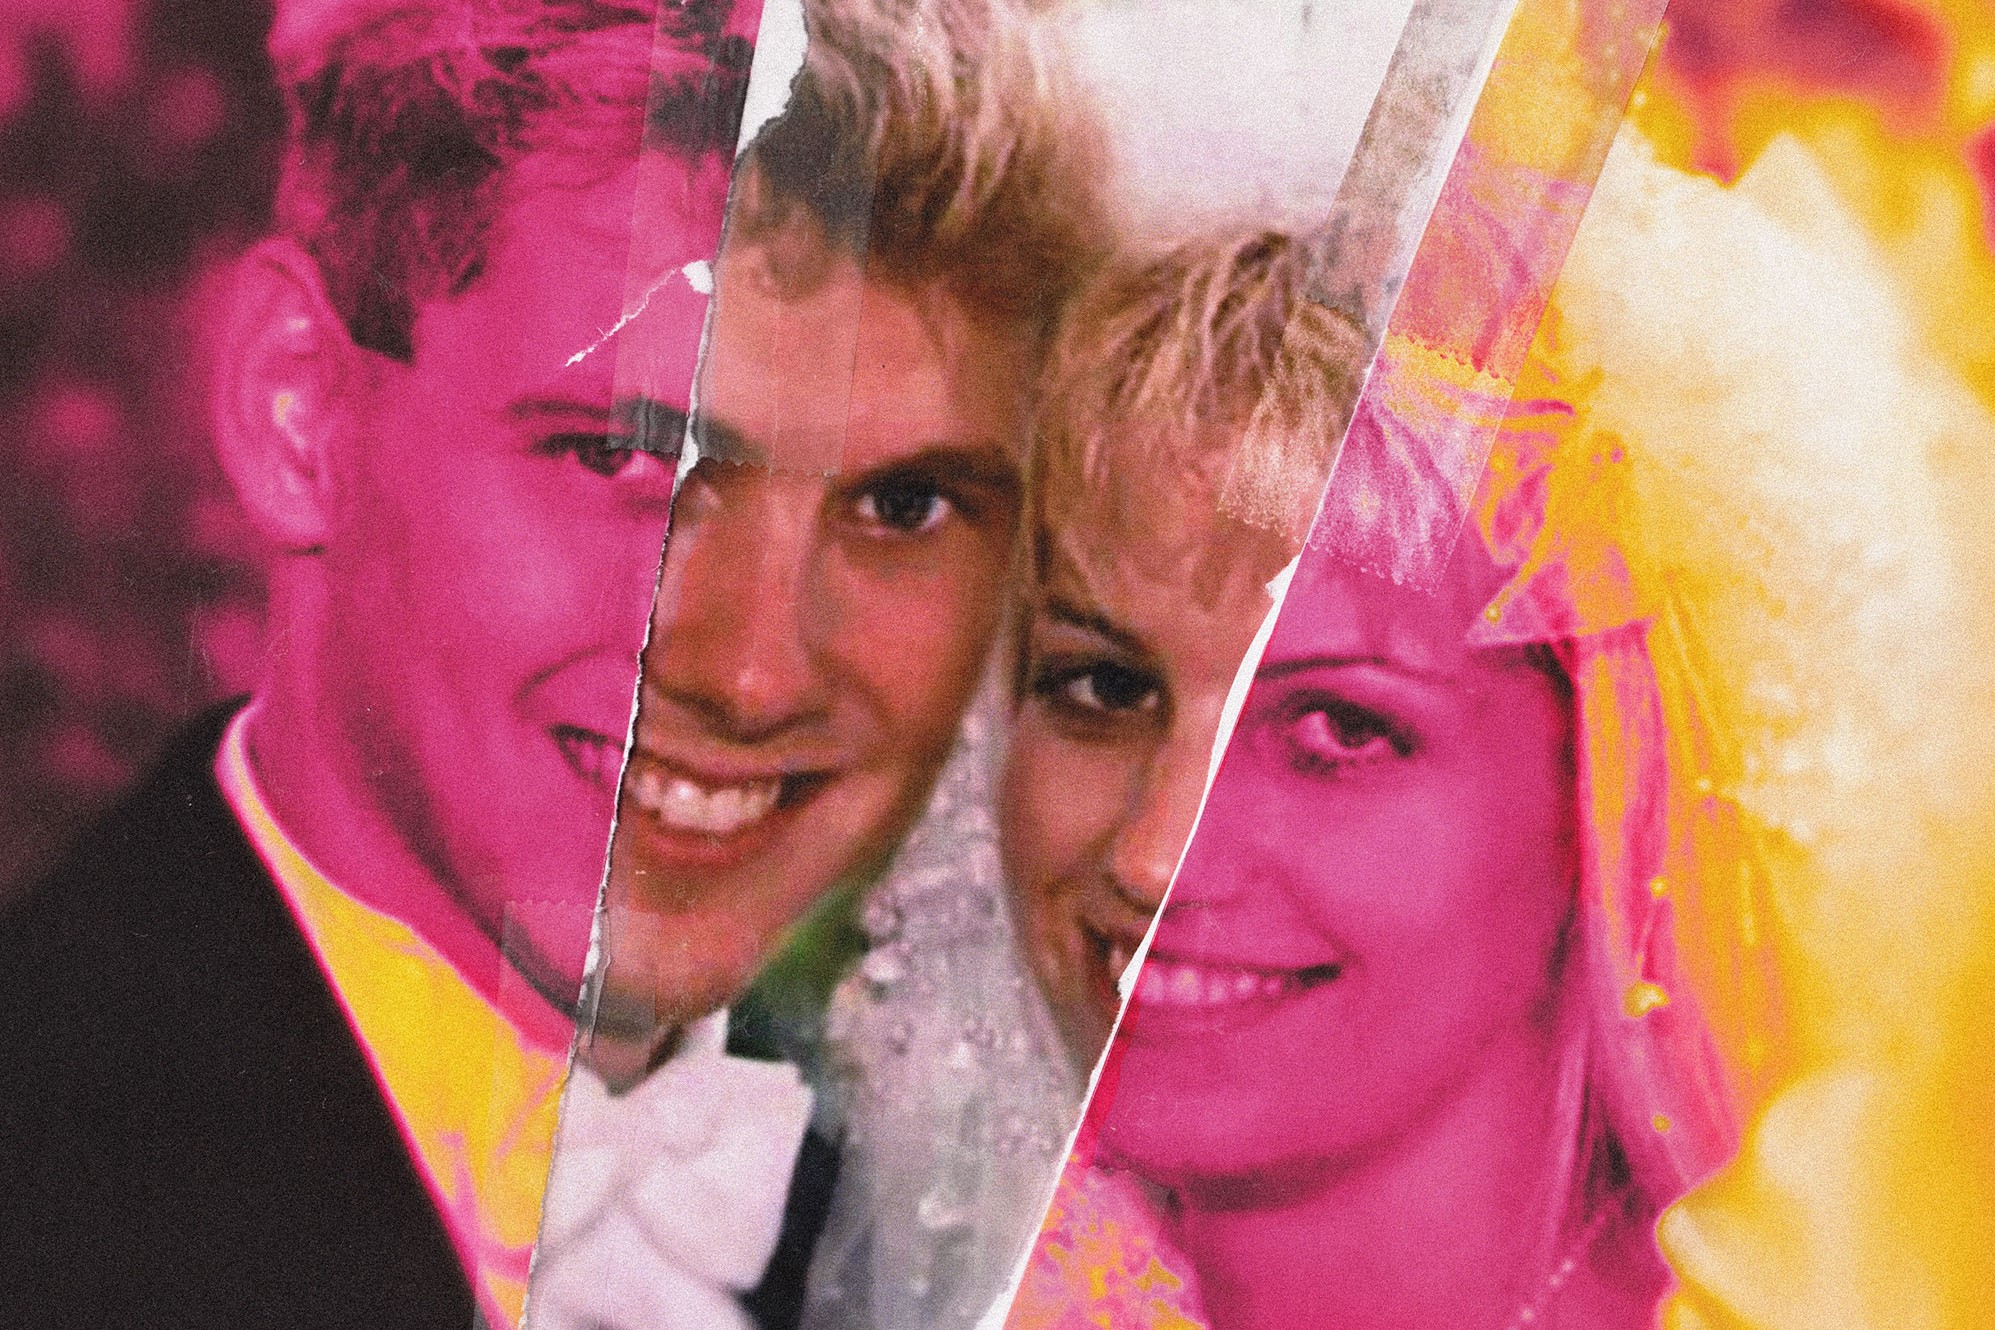 Everything you need to know about Ken and Barbie Killers, Paul Bernardo and...